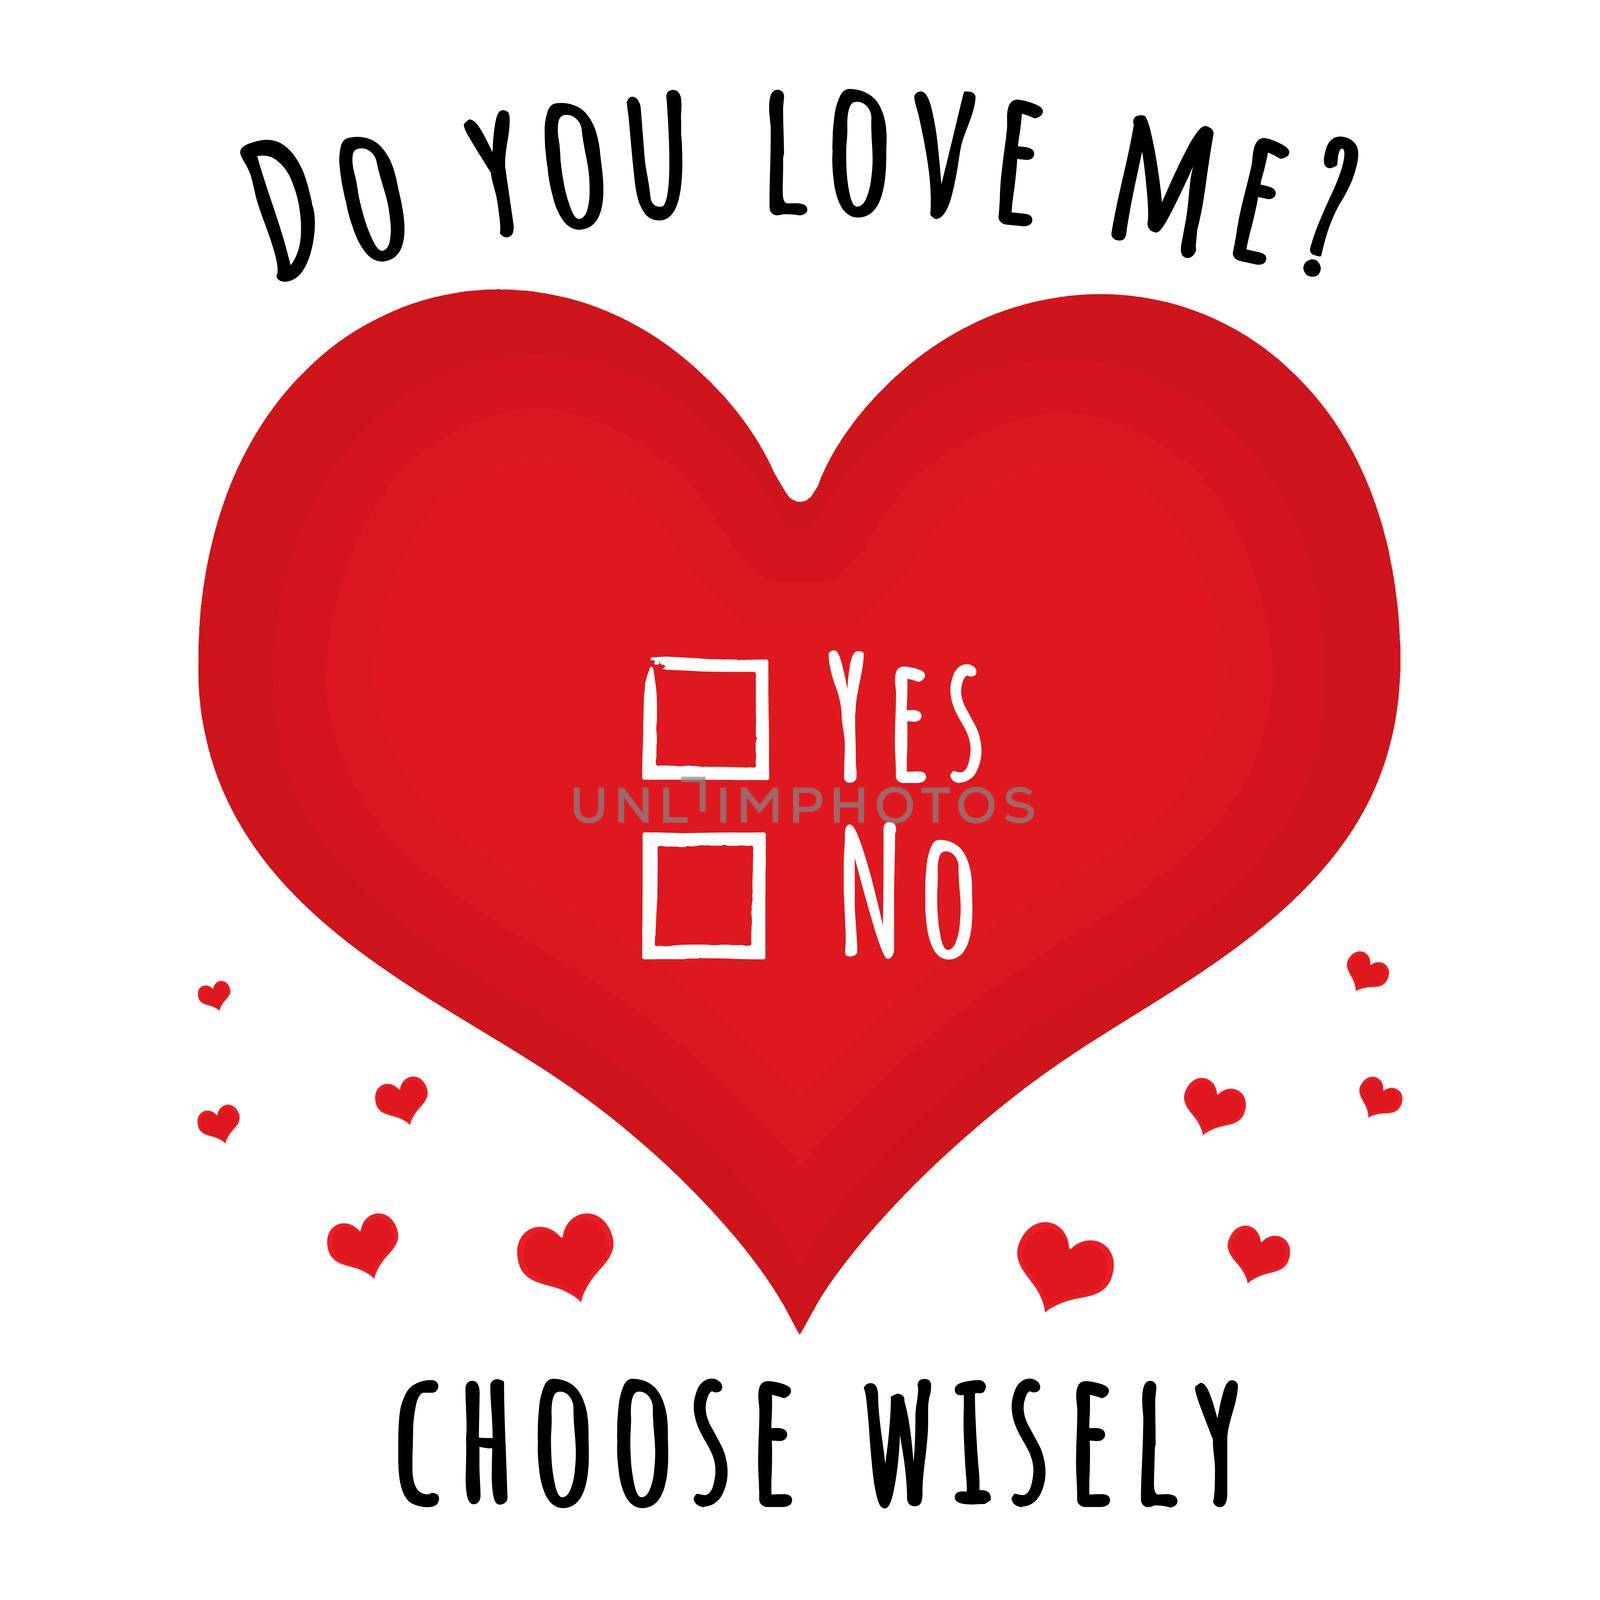 Love hearts with the text "do you love me? Choose wisely" and two tick boxes with "Yes No" next to them